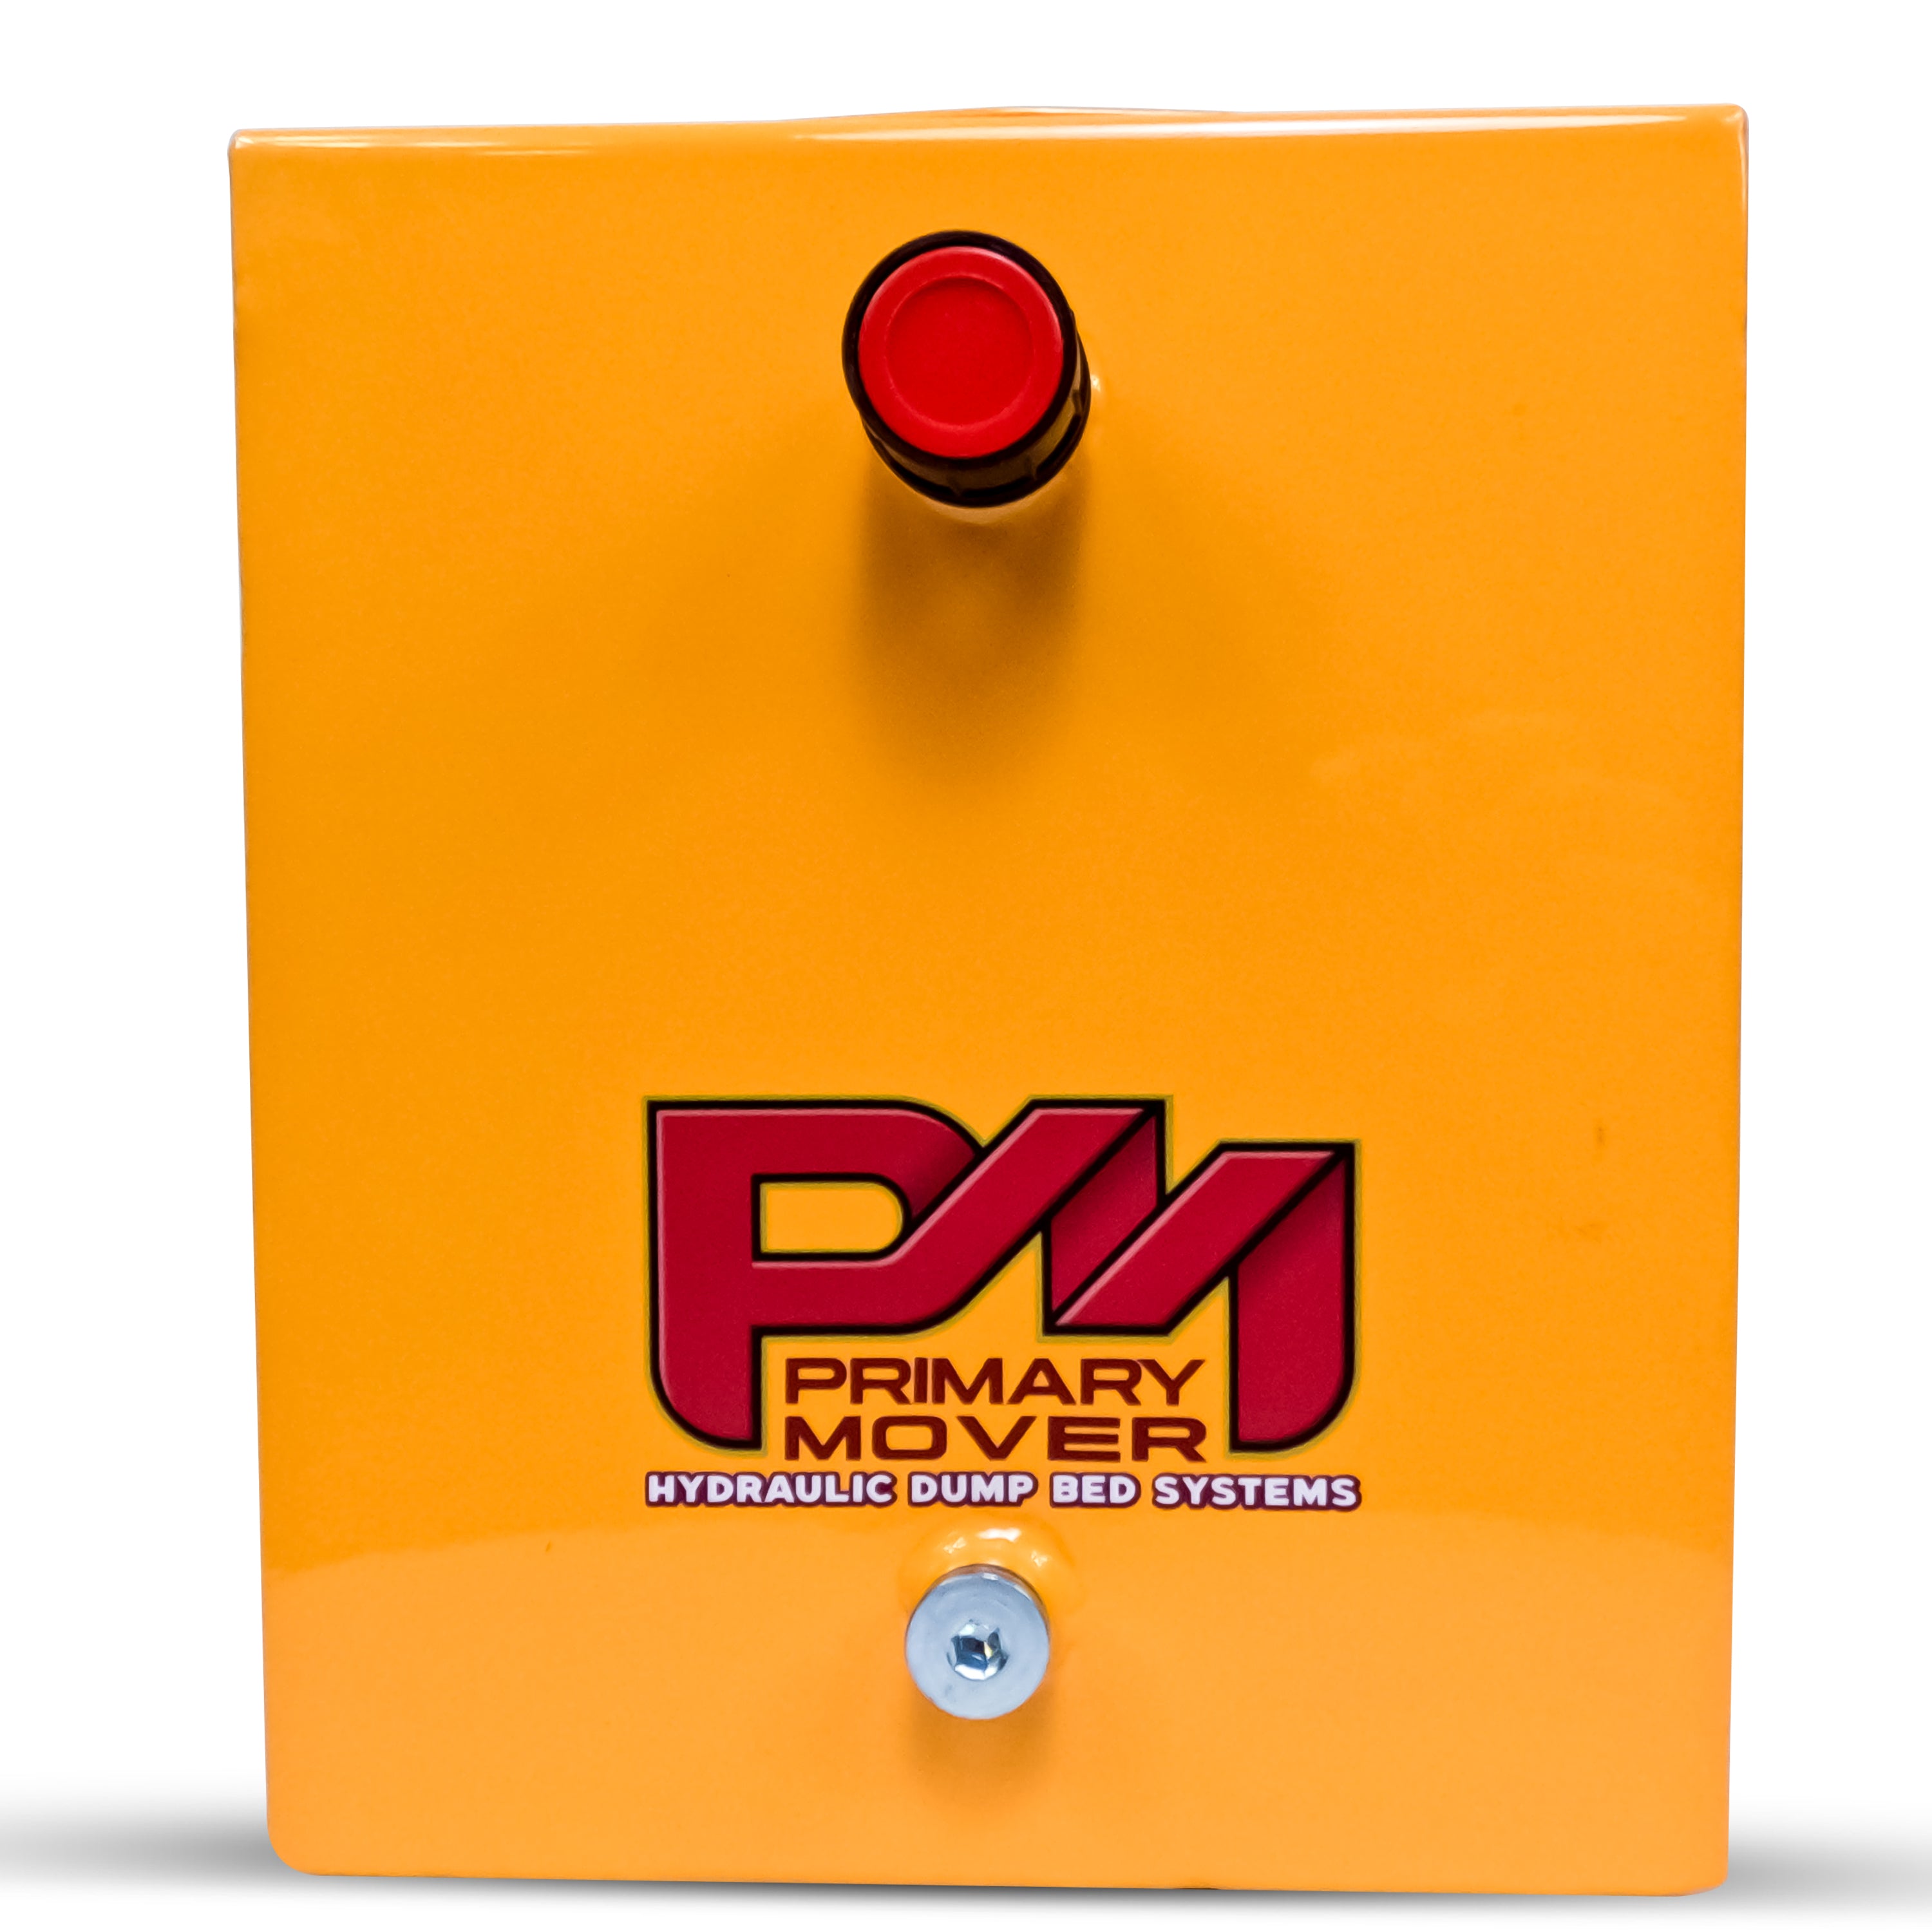 A yellow box with red buttons, a logo, and a red cap, showcasing a 10-quart steel hydraulic reservoir for hydraulic pumps. Durable steel construction, precise measurements, and plug and breather caps included for versatile hydraulic system compatibility.